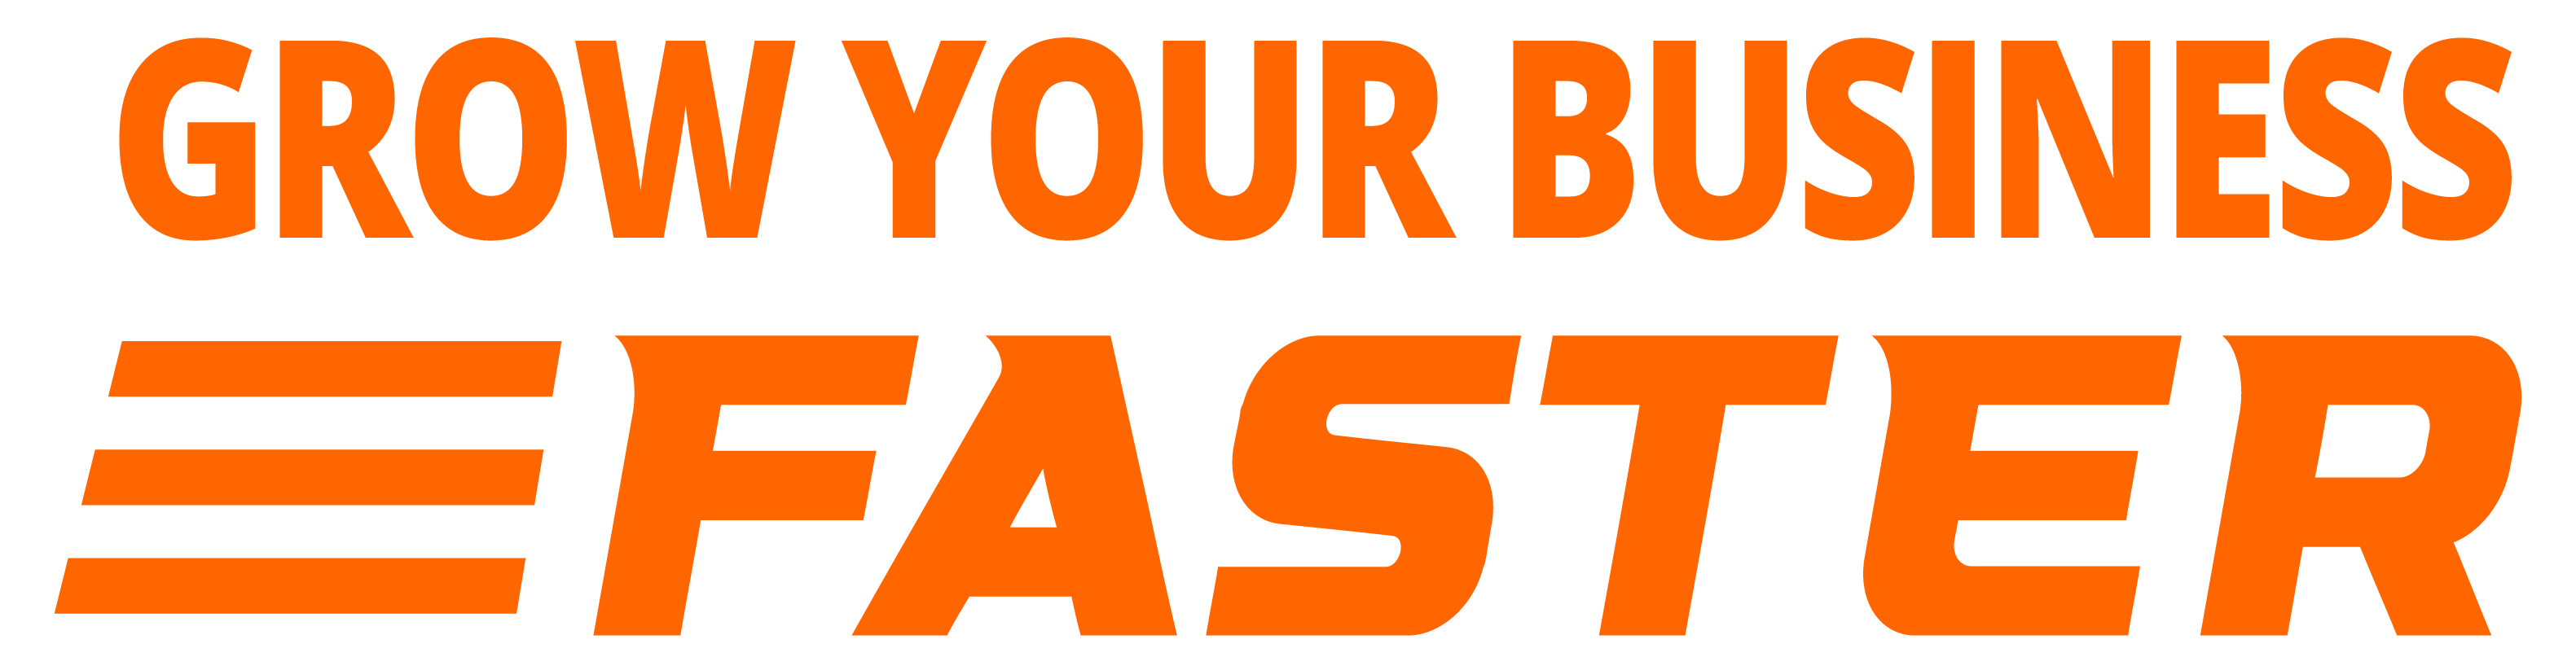 Grow Your Business FASTER Logo